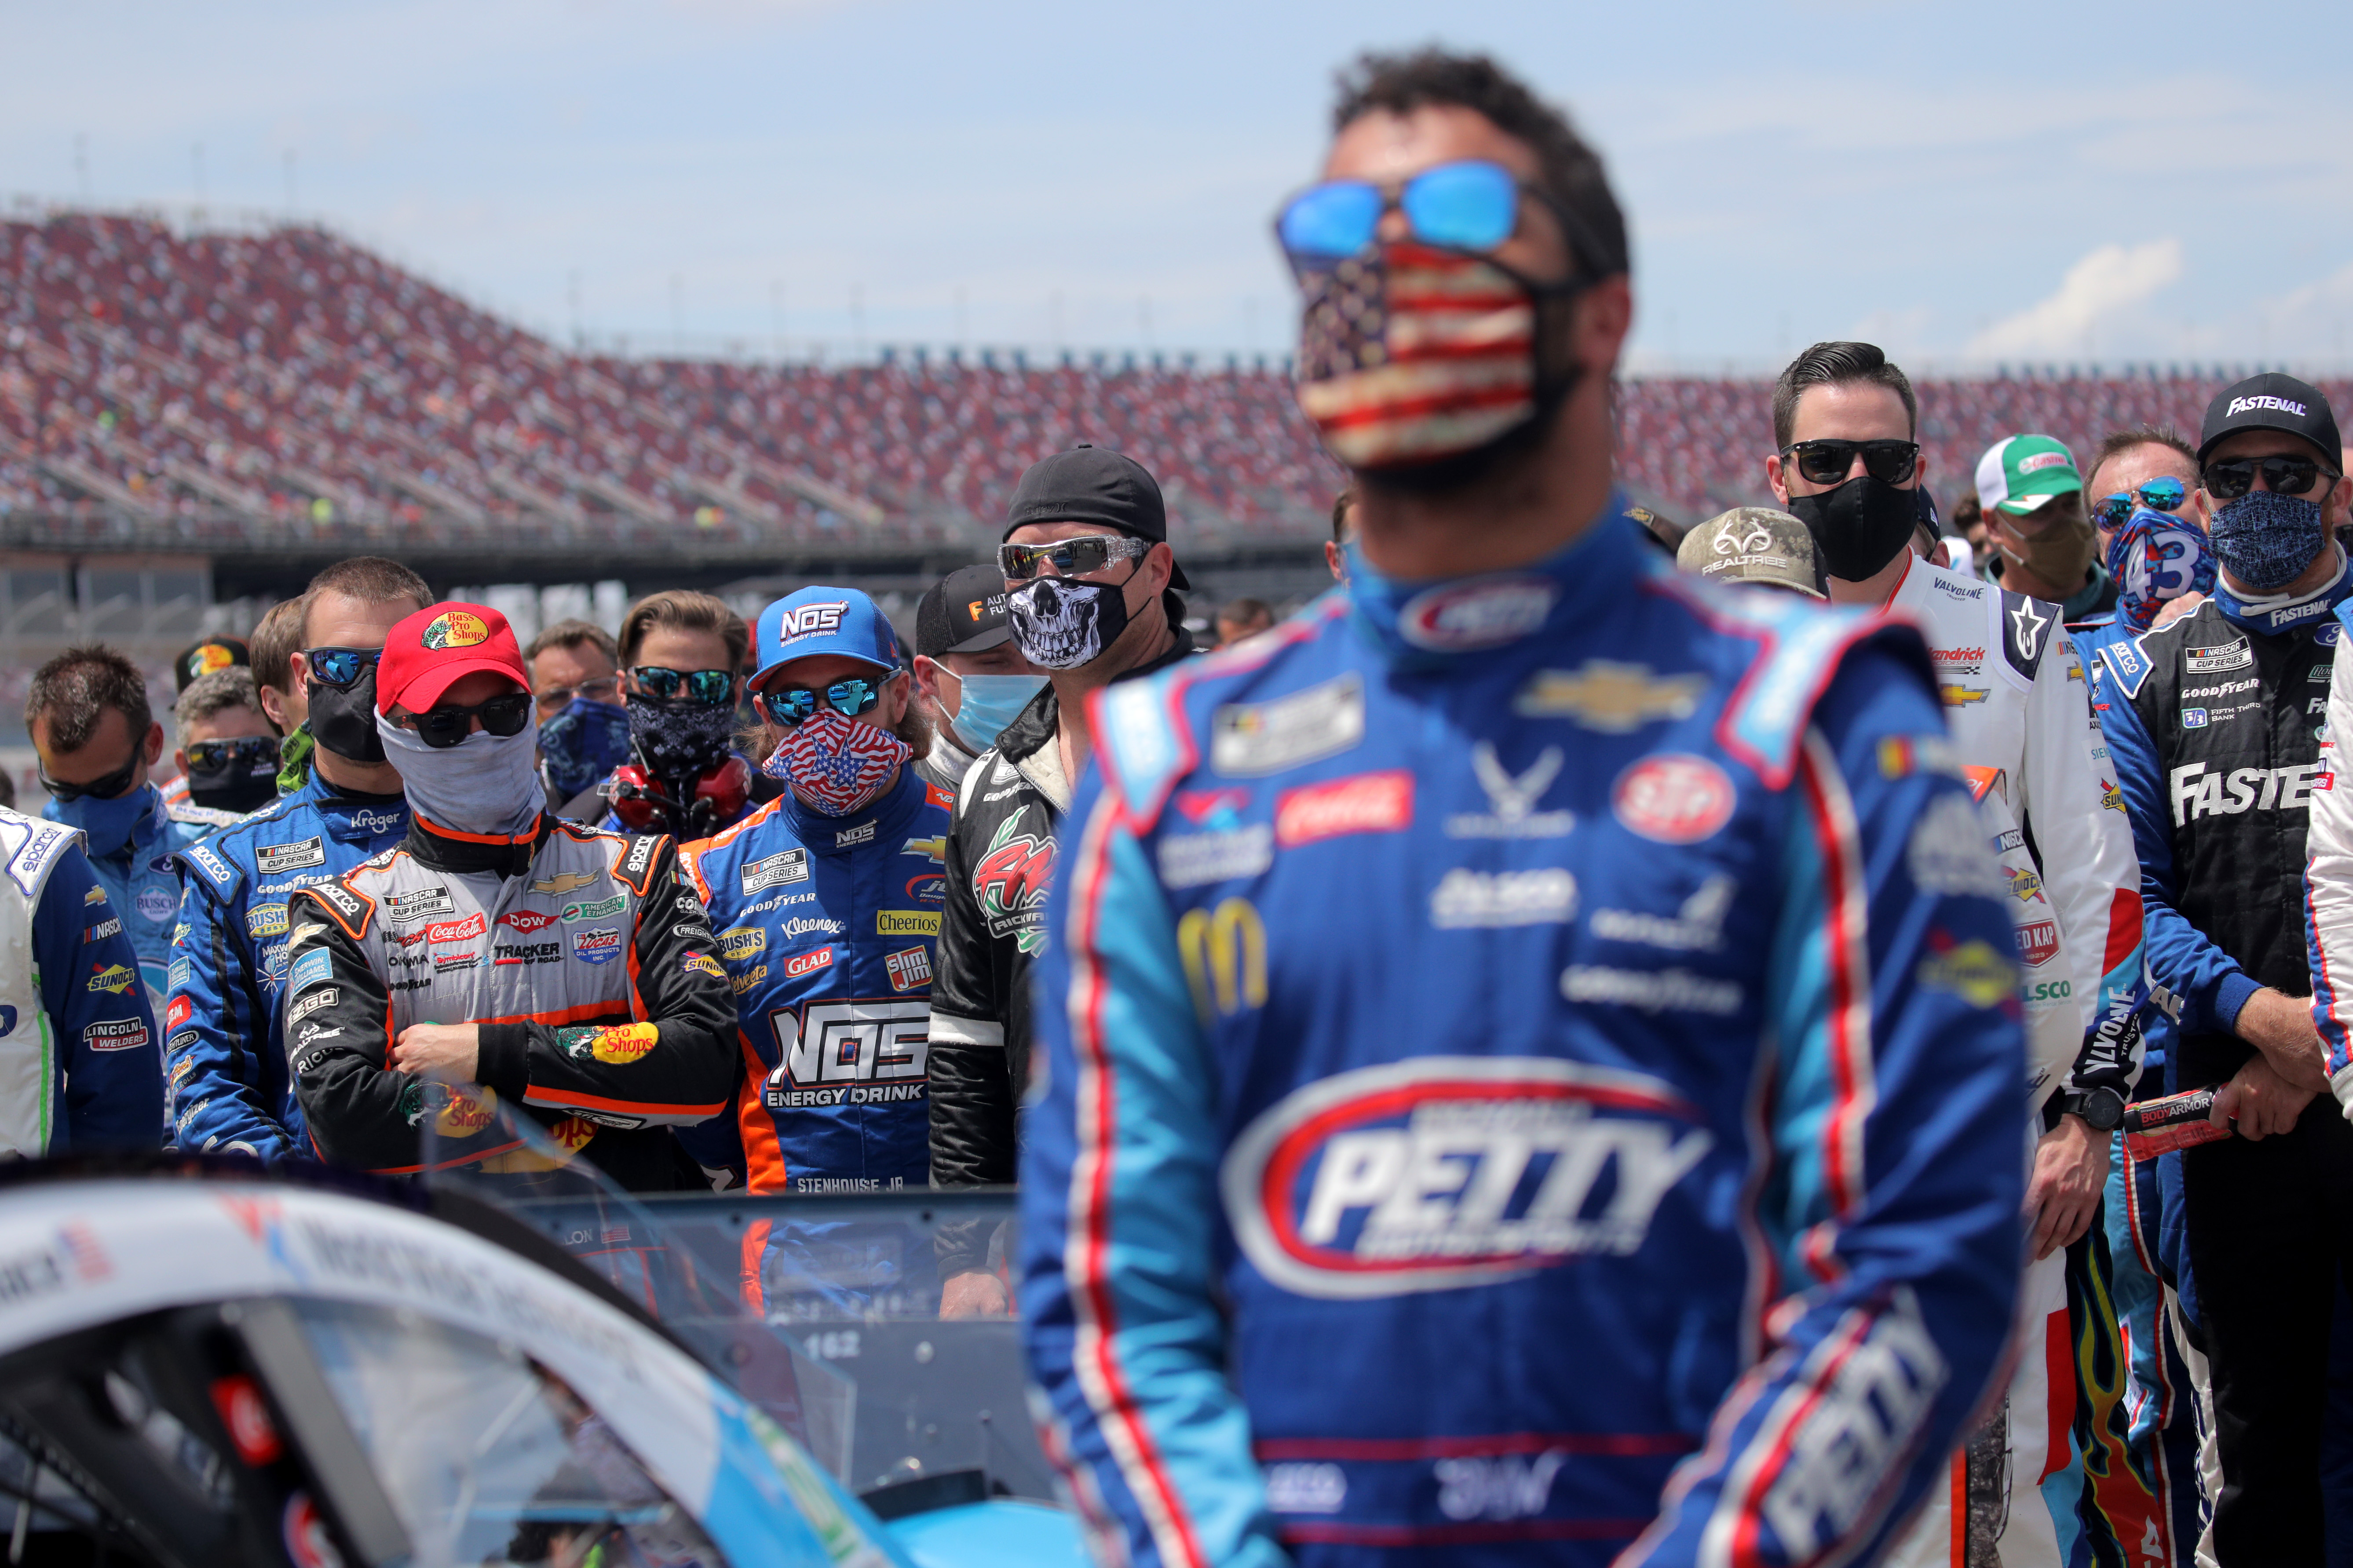 Hate Crime or Not, NASCAR Didn't Deserve the Benefit of the Doubt